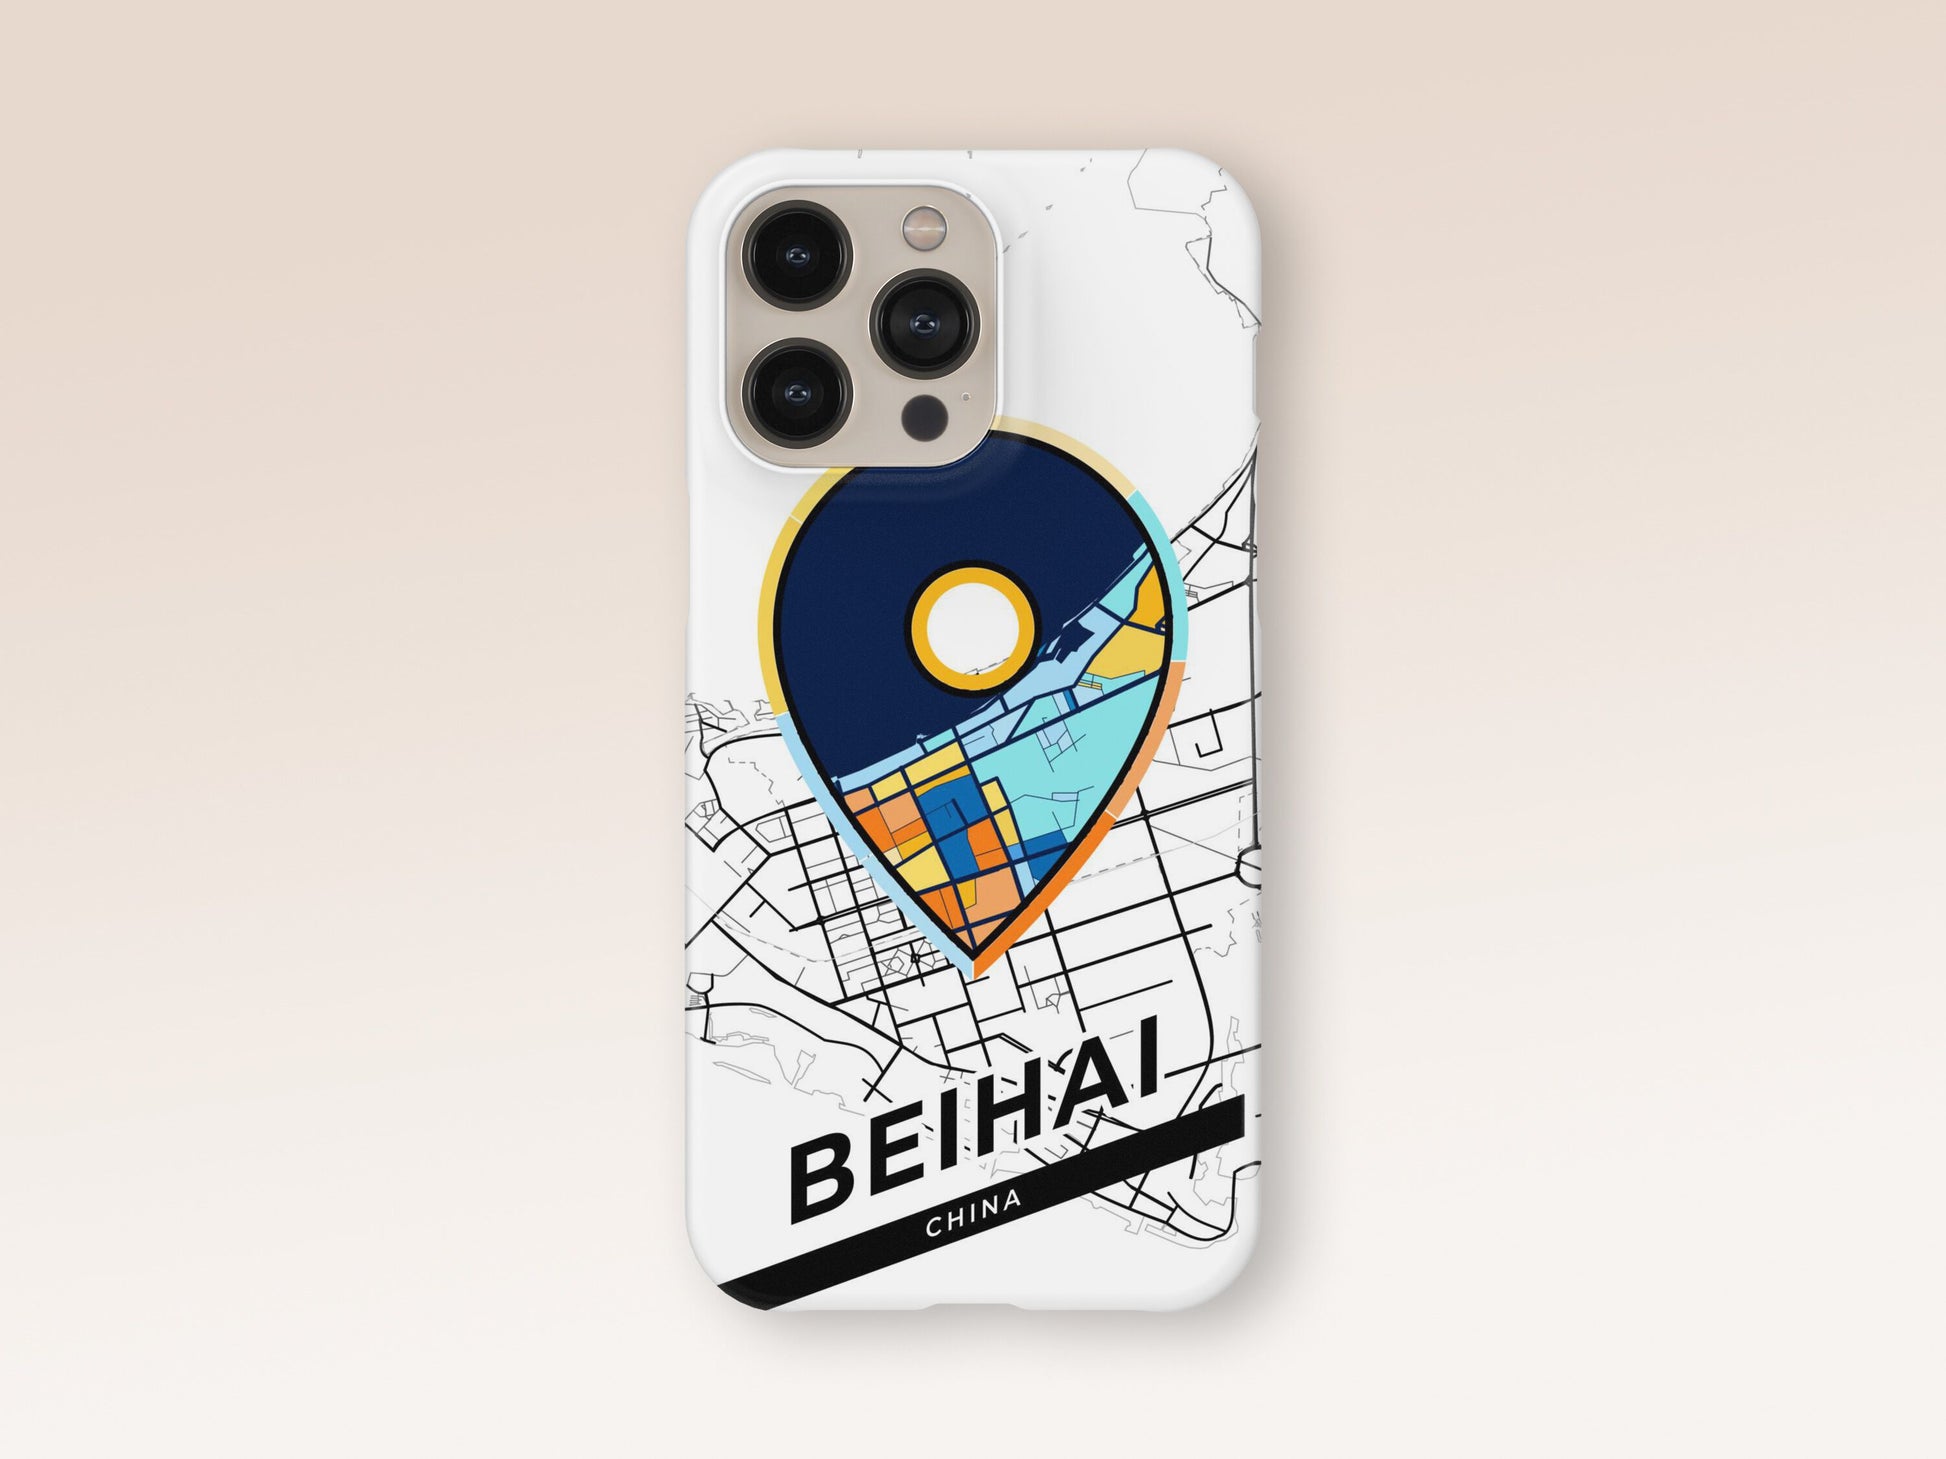 Beihai China slim phone case with colorful icon. Birthday, wedding or housewarming gift. Couple match cases. 1